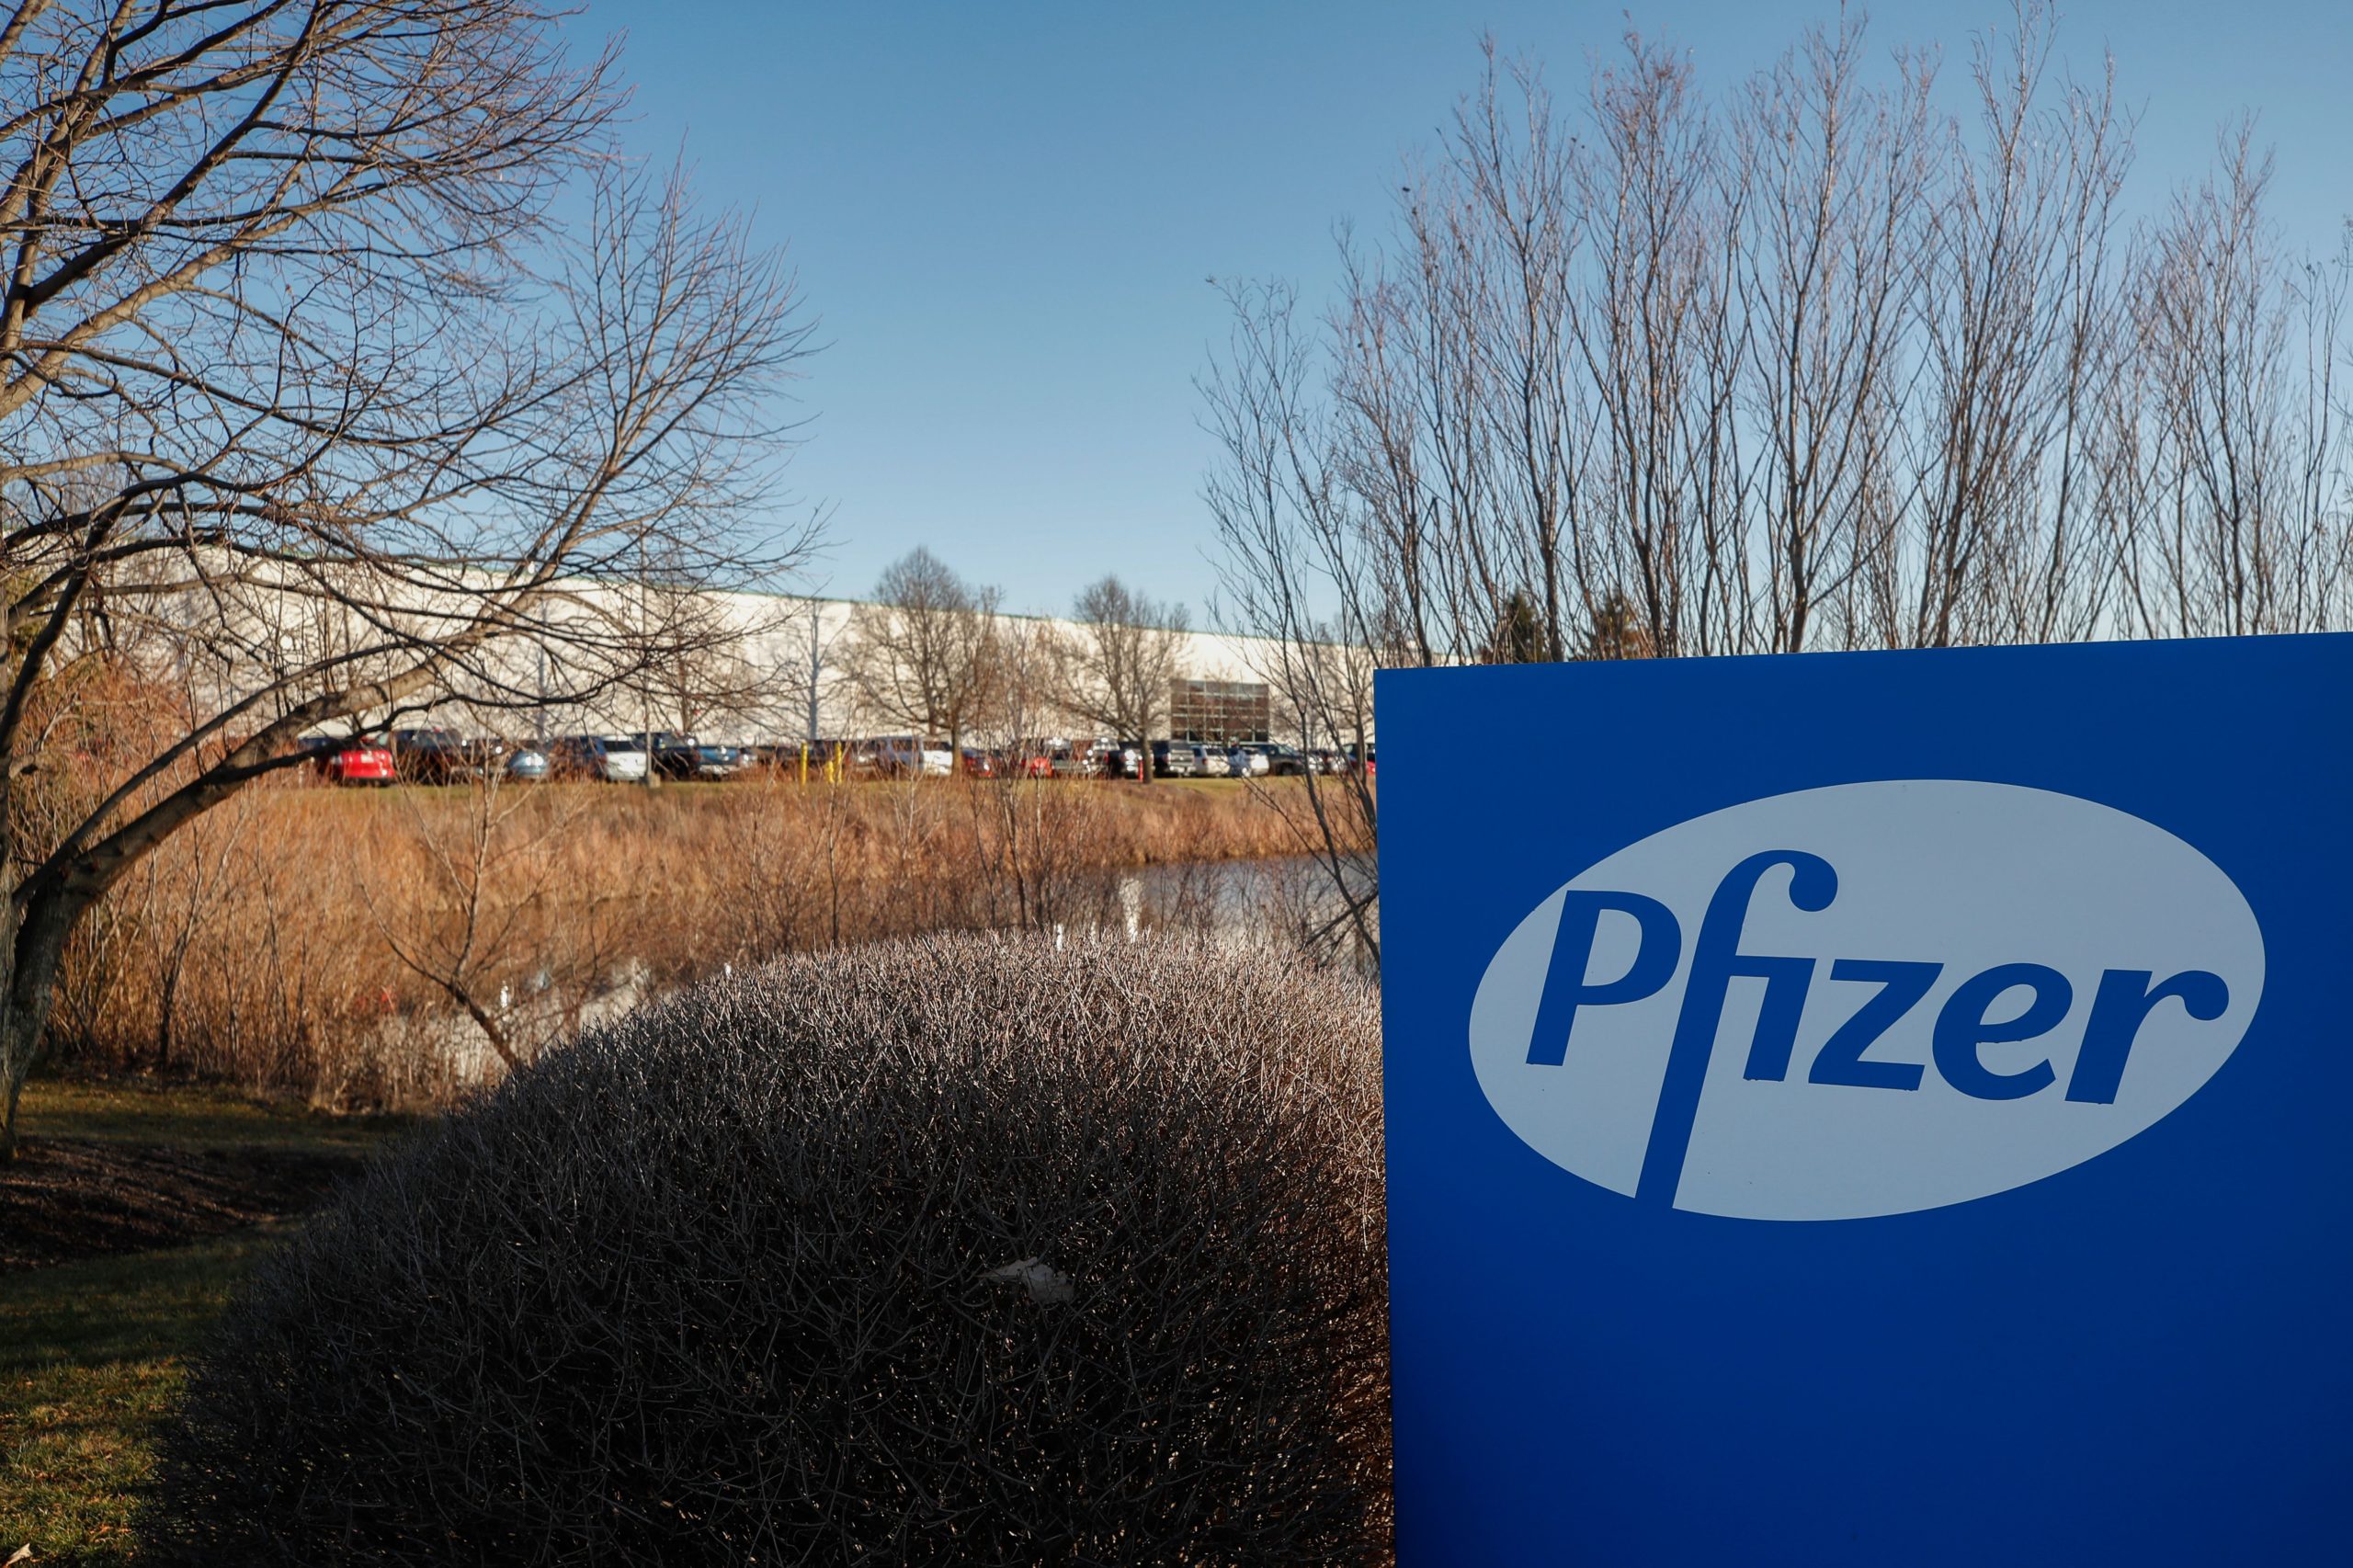 The Pfizer facility in Pleasant Prairie, Wisconsin, on December 1, 2020. - Awaiting approval from the Federal Drug Administration, Pfizer is reported to be utilizing cold storage to hold the Covid-19 vaccine at their distribution site in Pleasant Prairie. (Photo by Kamil Krzaczynski/AFP via Getty Images)